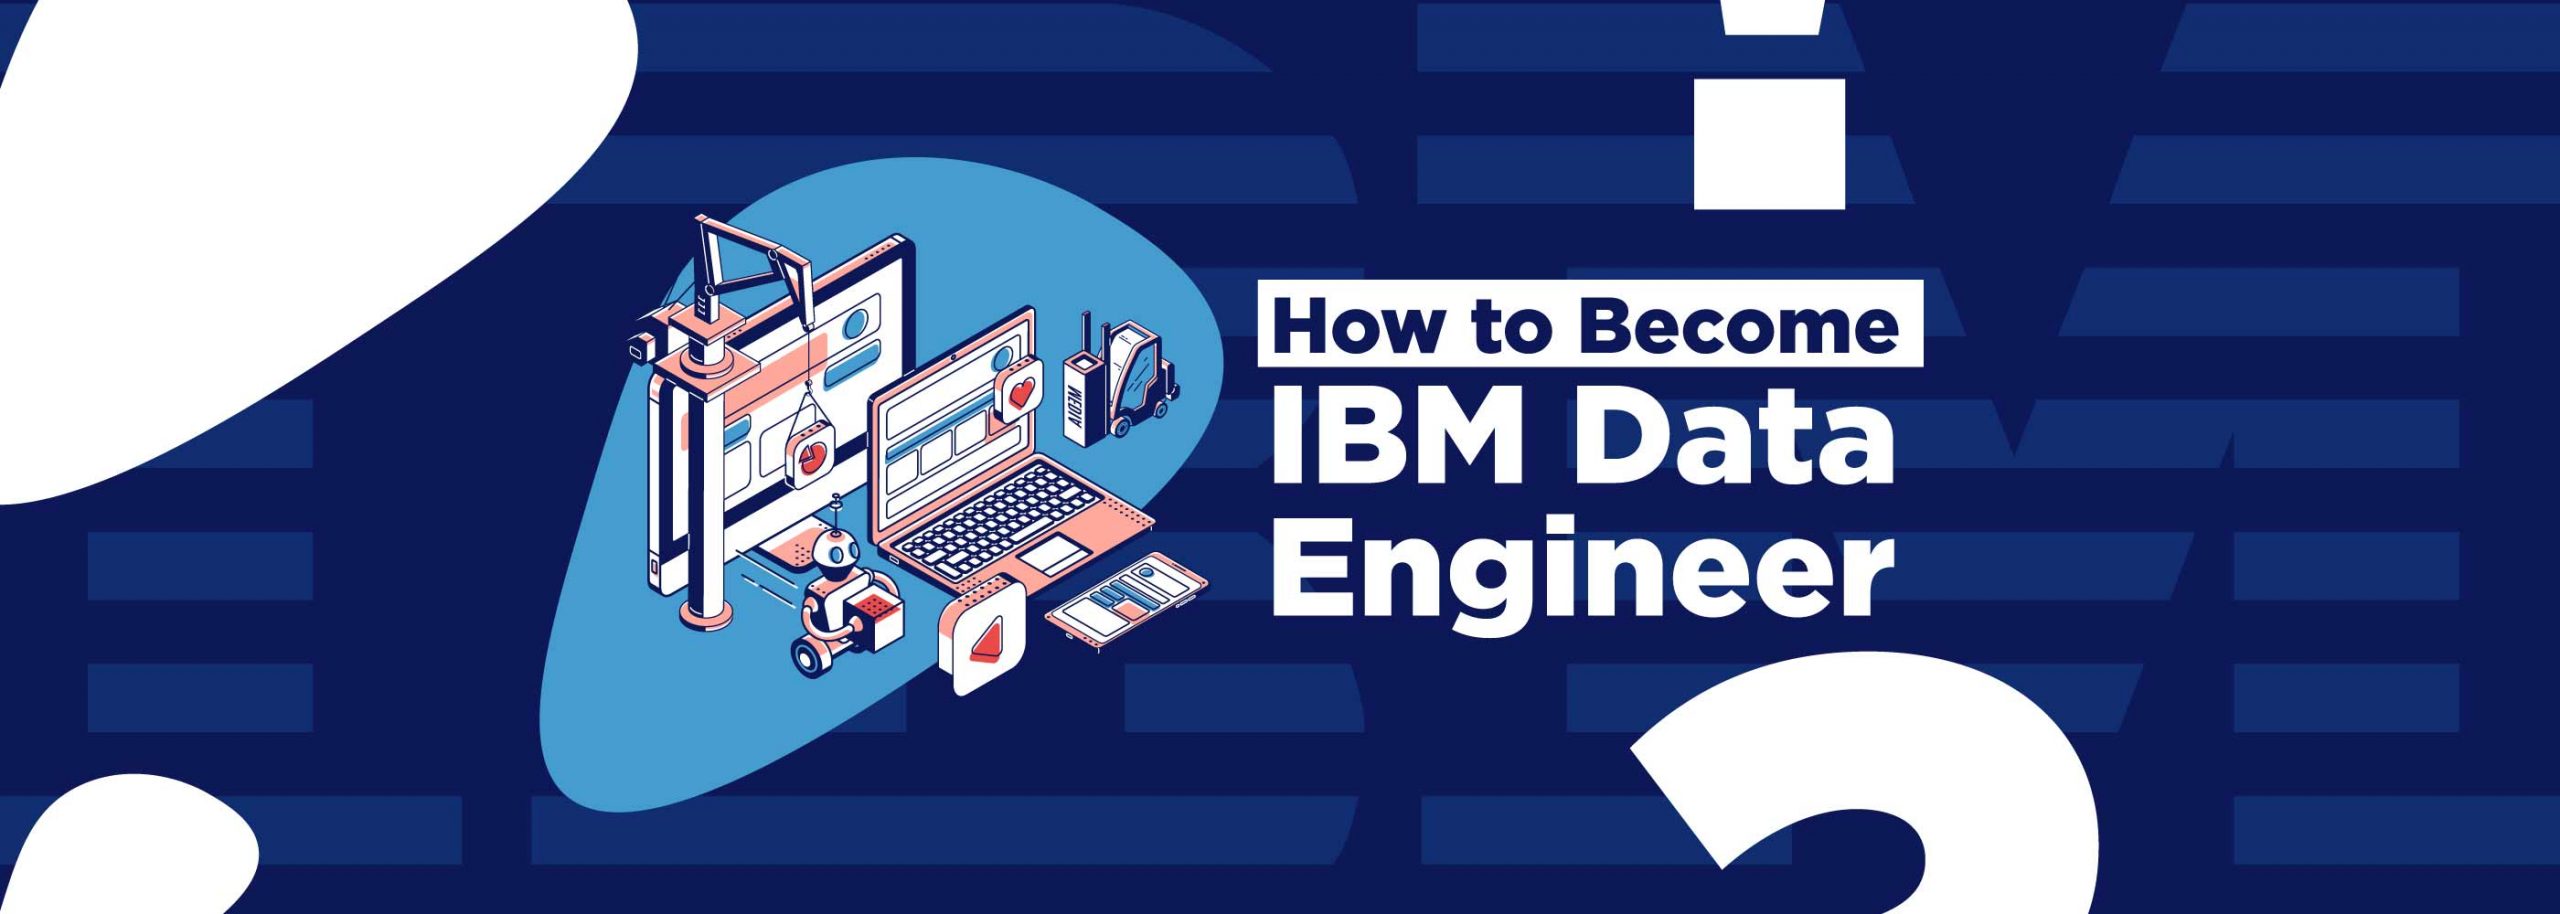 IBM Data Engineer: 11 Great Tips to Become One | Data Trained